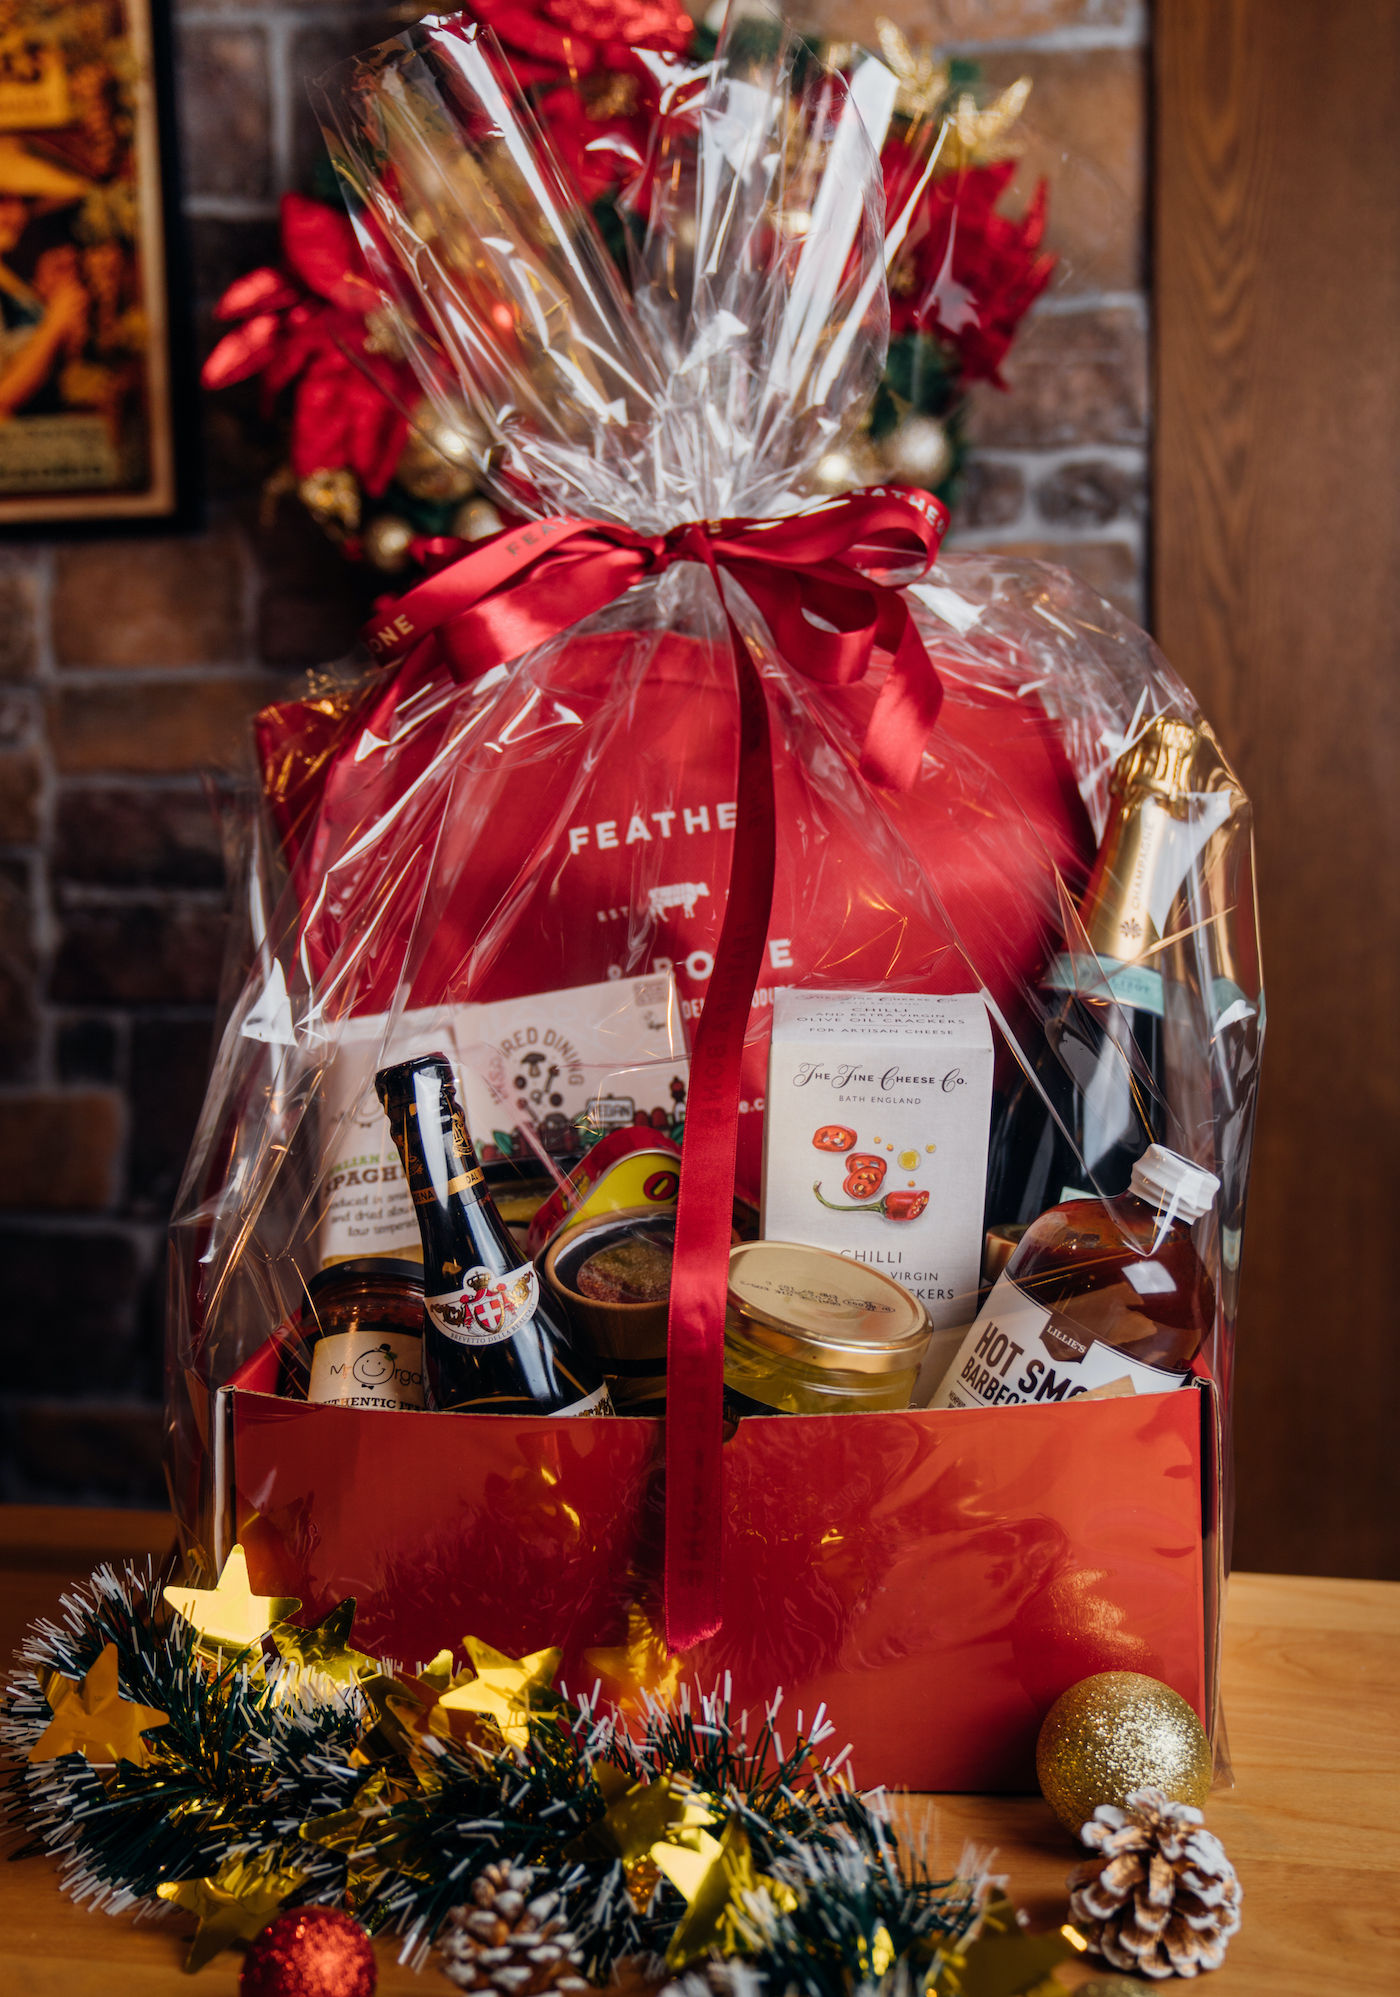 The 6 best Hong Kong Christmas hampers to gift for 2021